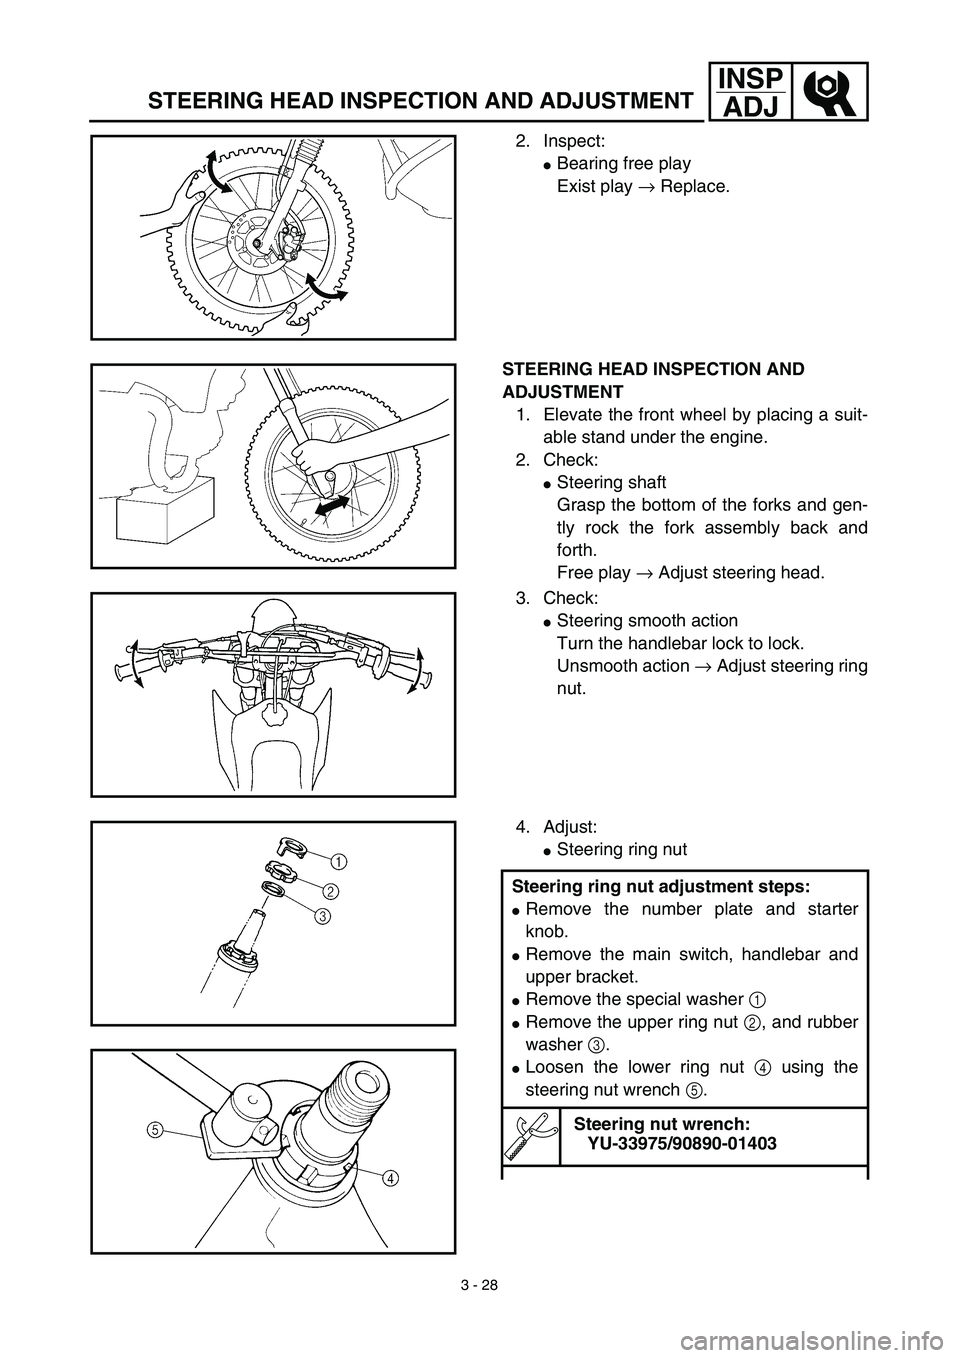 YAMAHA TTR125 2003  Owners Manual 3 - 28
INSP
ADJ
STEERING HEAD INSPECTION AND ADJUSTMENT
2. Inspect:
Bearing free play
Exist play → Replace.
STEERING HEAD INSPECTION AND 
ADJUSTMENT
1. Elevate the front wheel by placing a suit-
ab